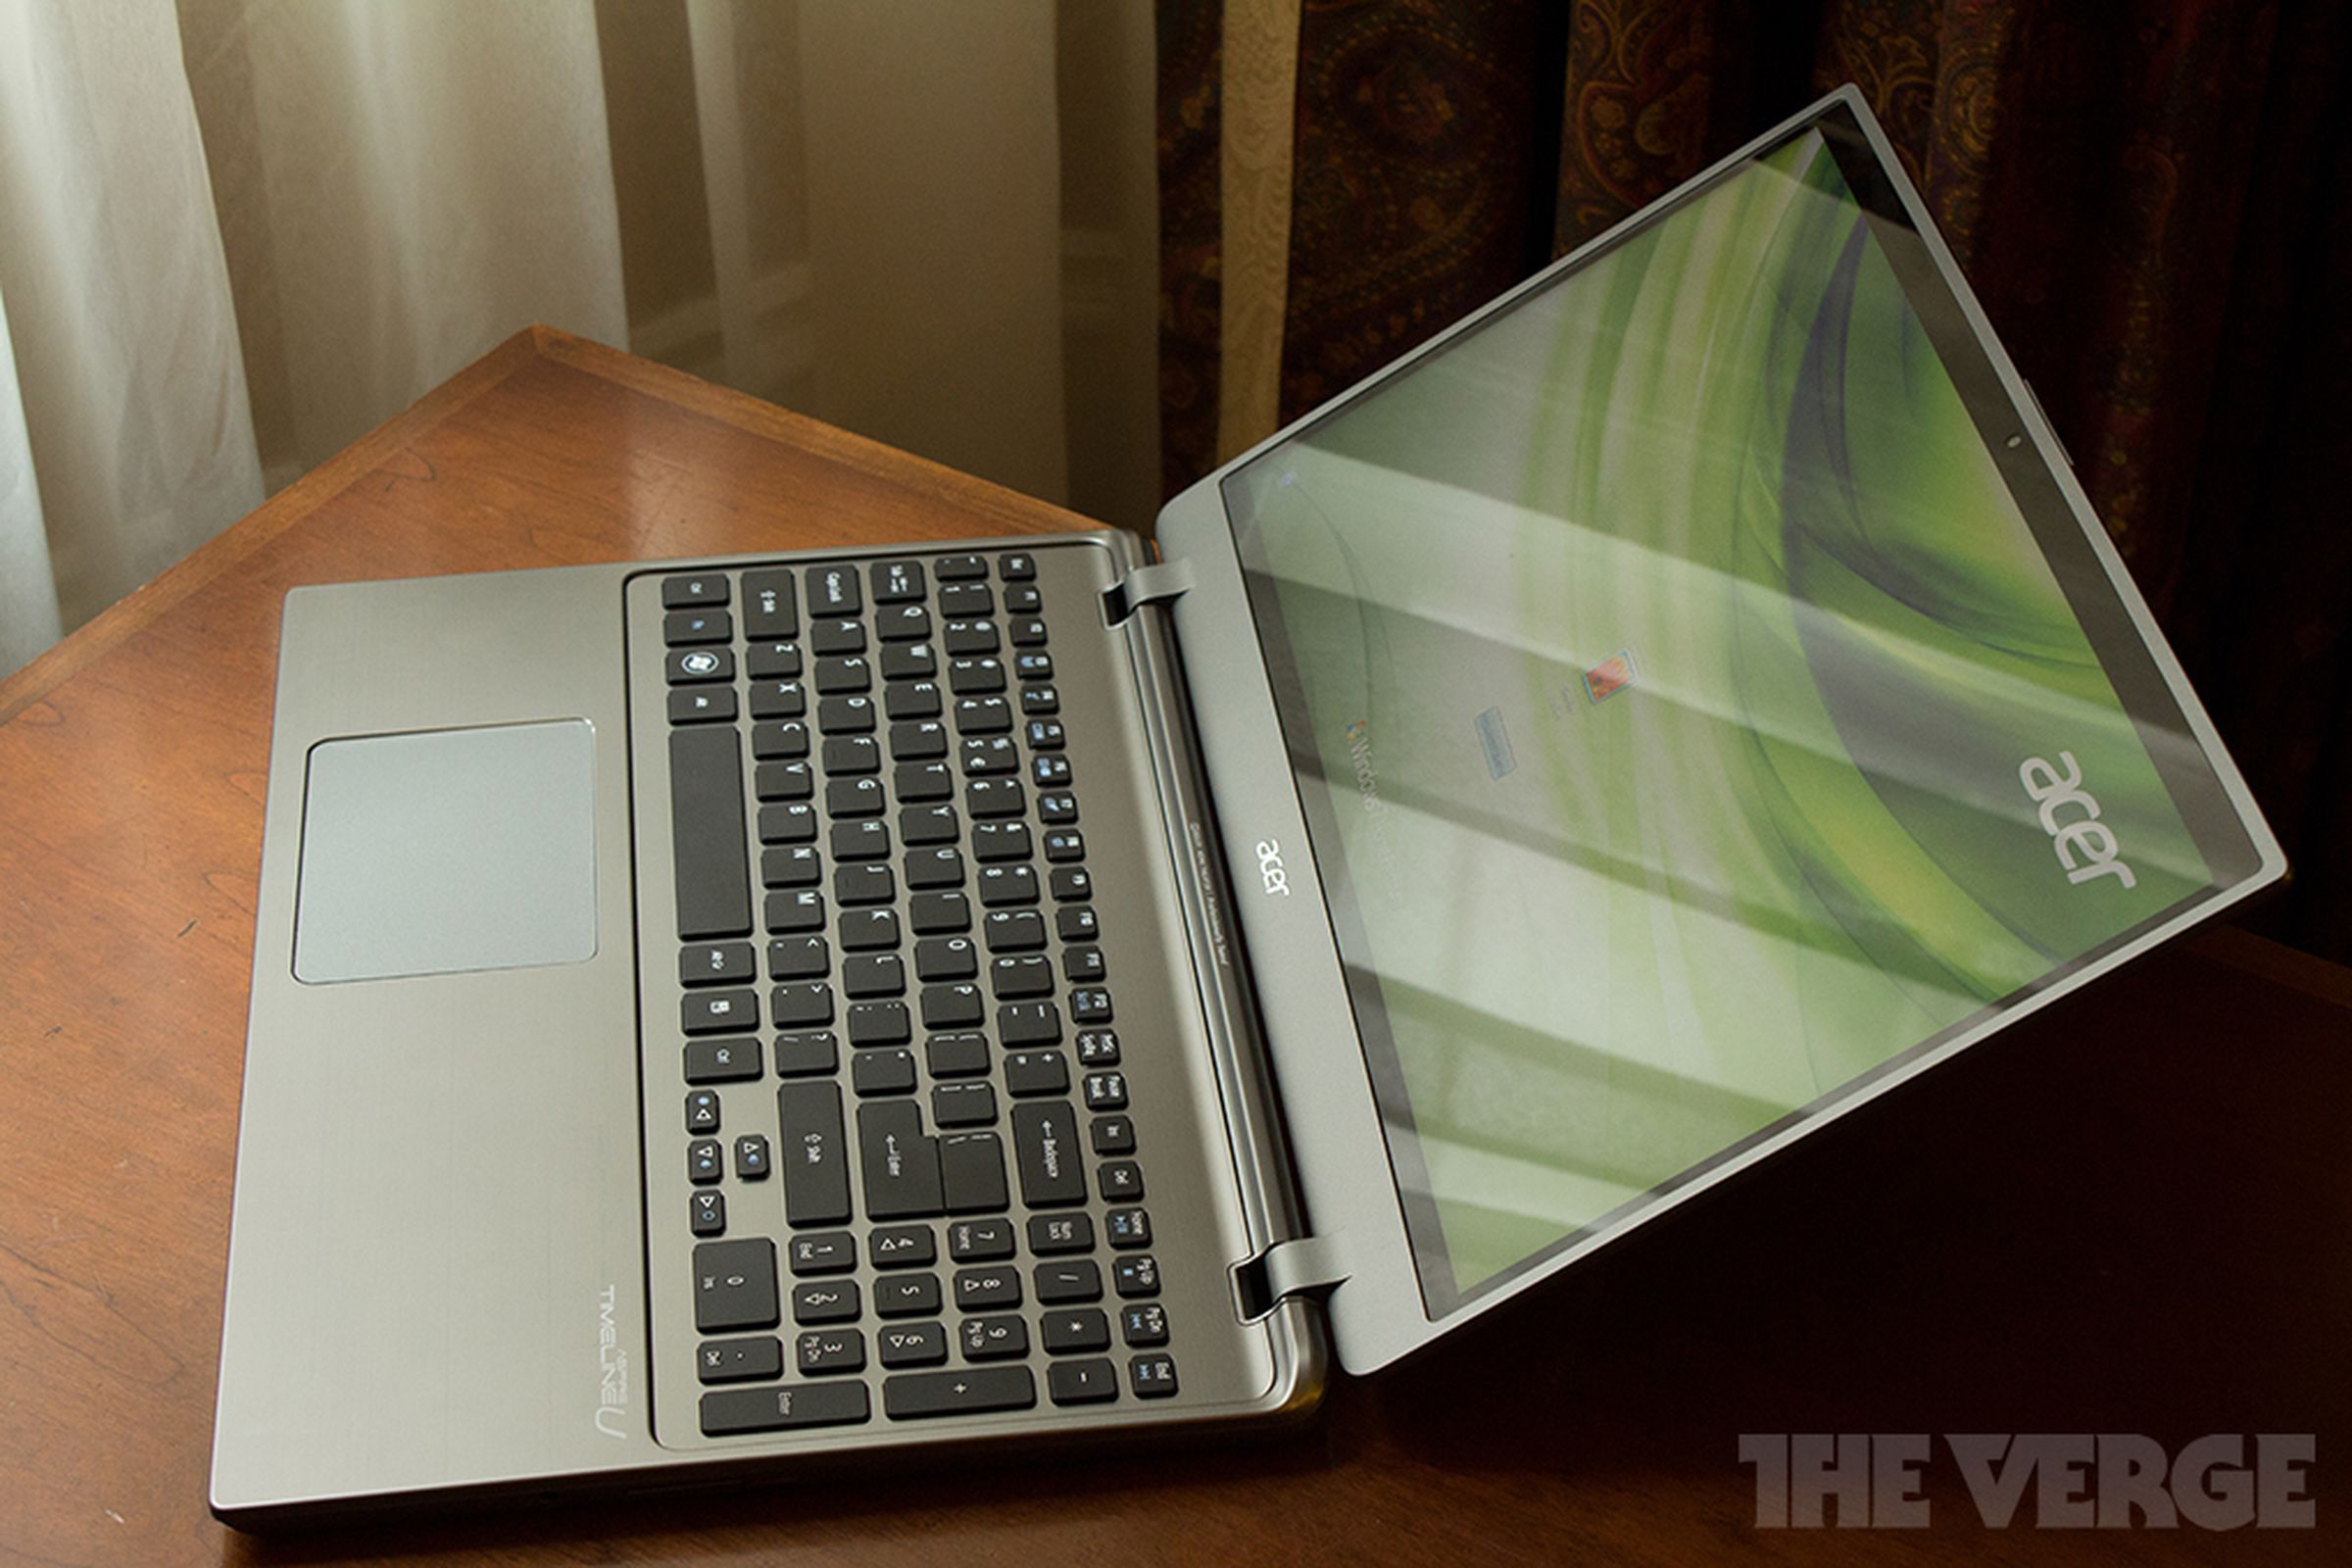 Gallery Photo: Acer Aspire Timeline Ultra M5 hands-on pictures